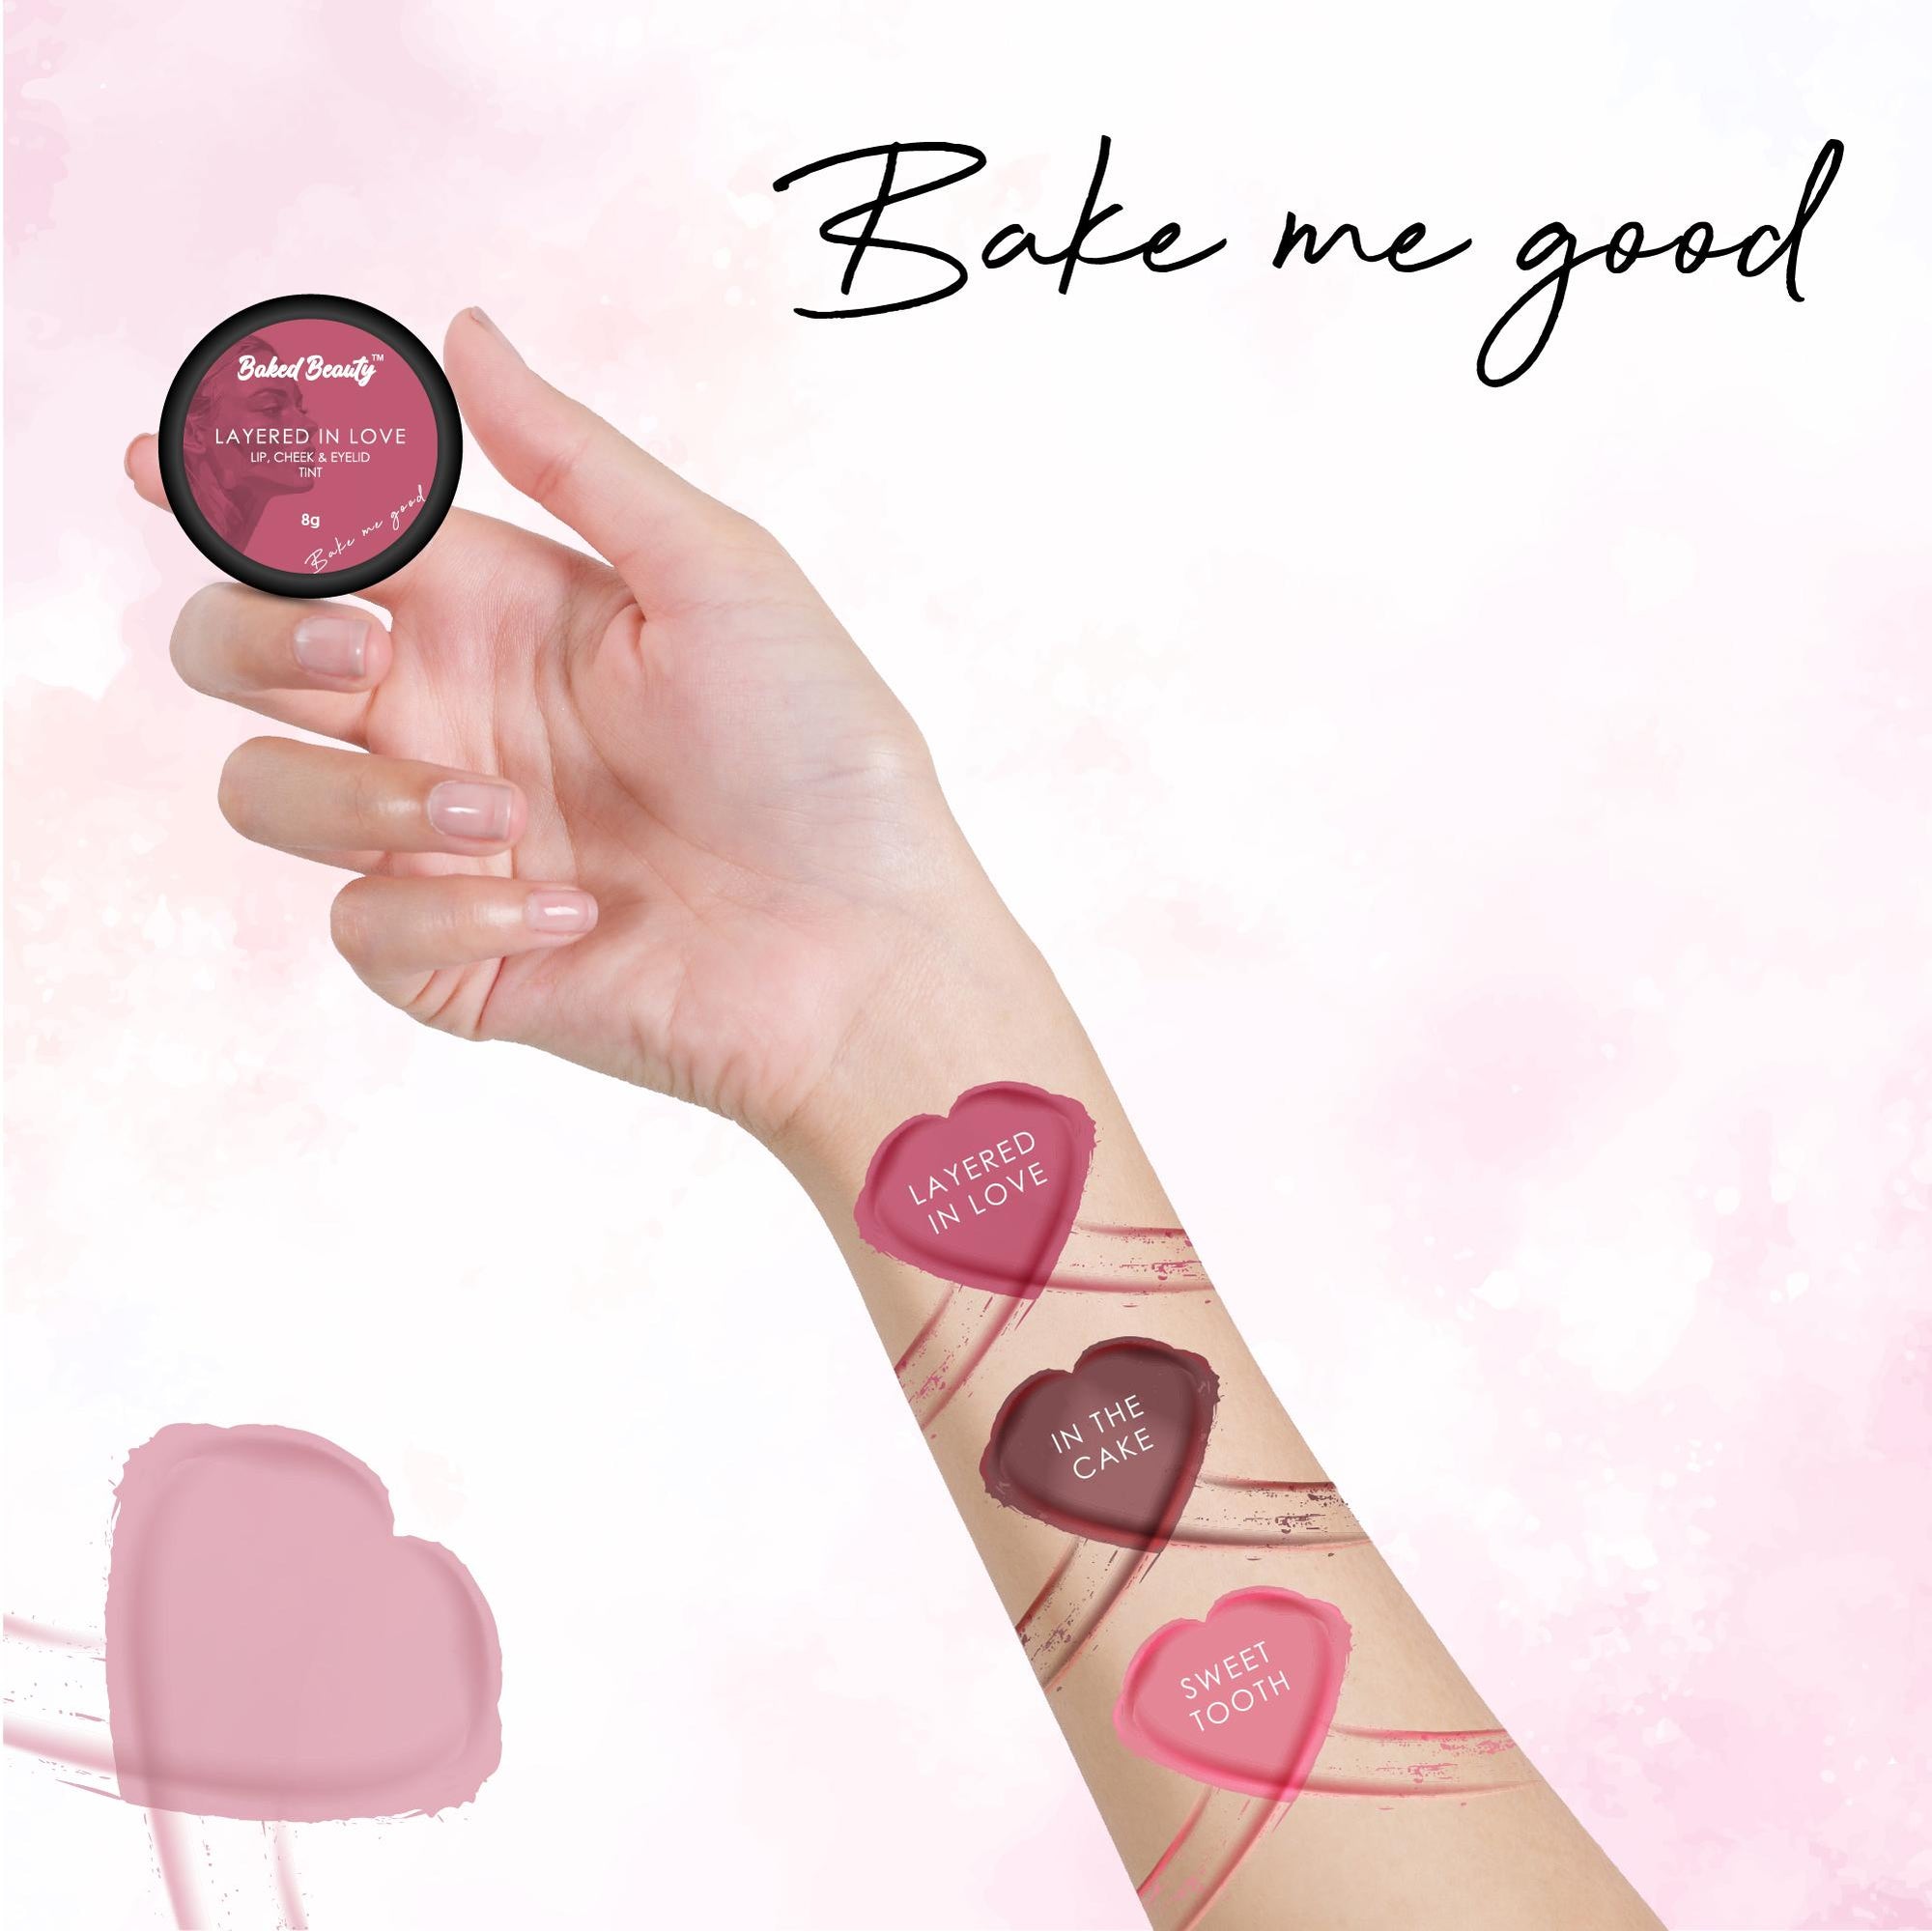 Layered In Love 3-in-1 Tint